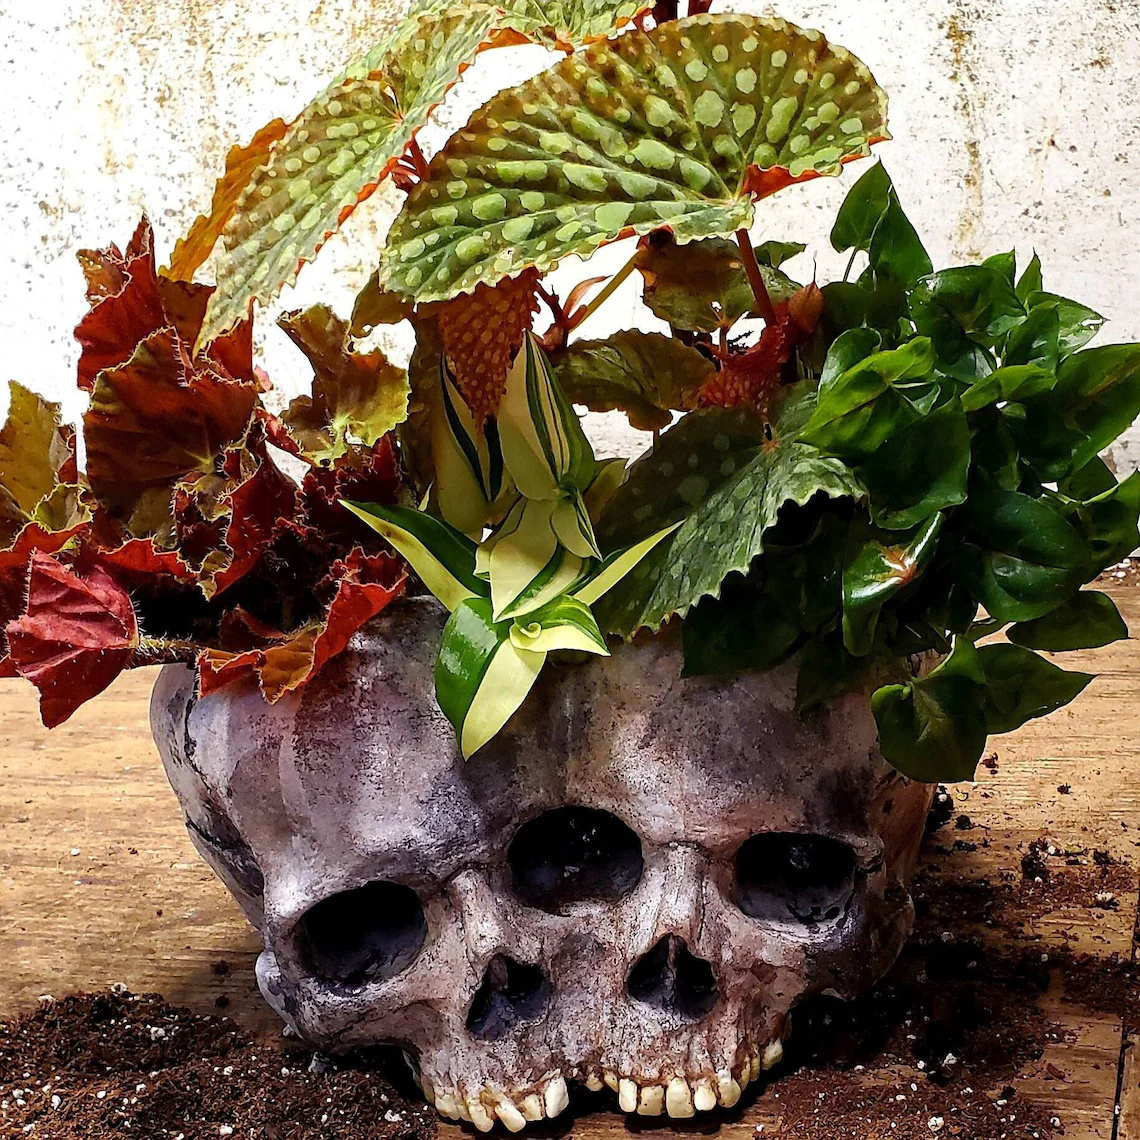 Conjoined Twins Human Skull Sculpture or Planter